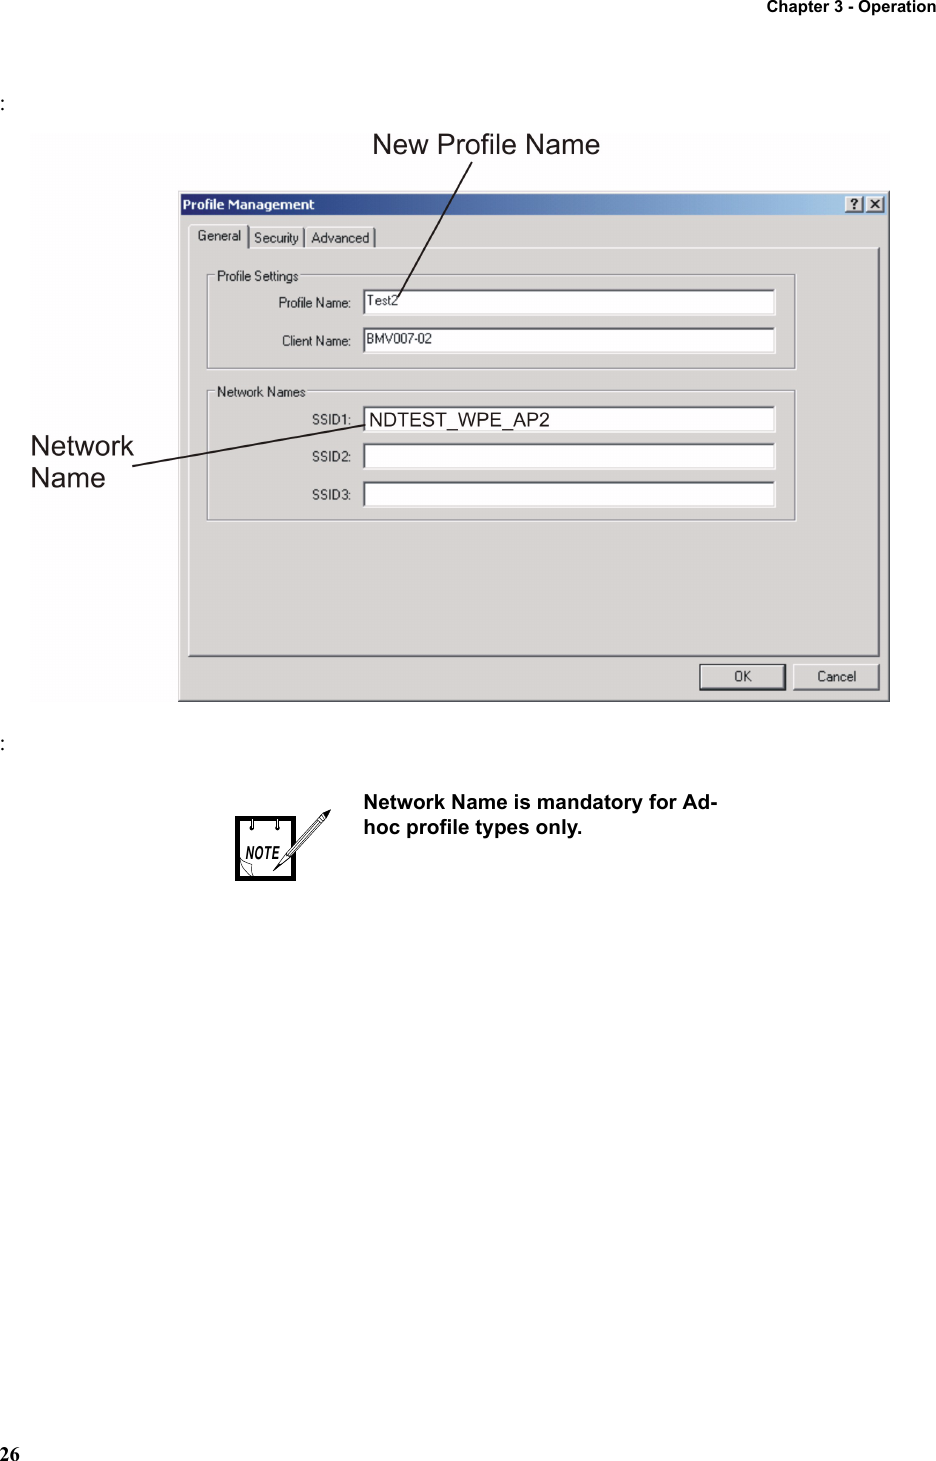 Chapter 3 - Operation26::Network Name is mandatory for Ad-hoc profile types only.NOTE